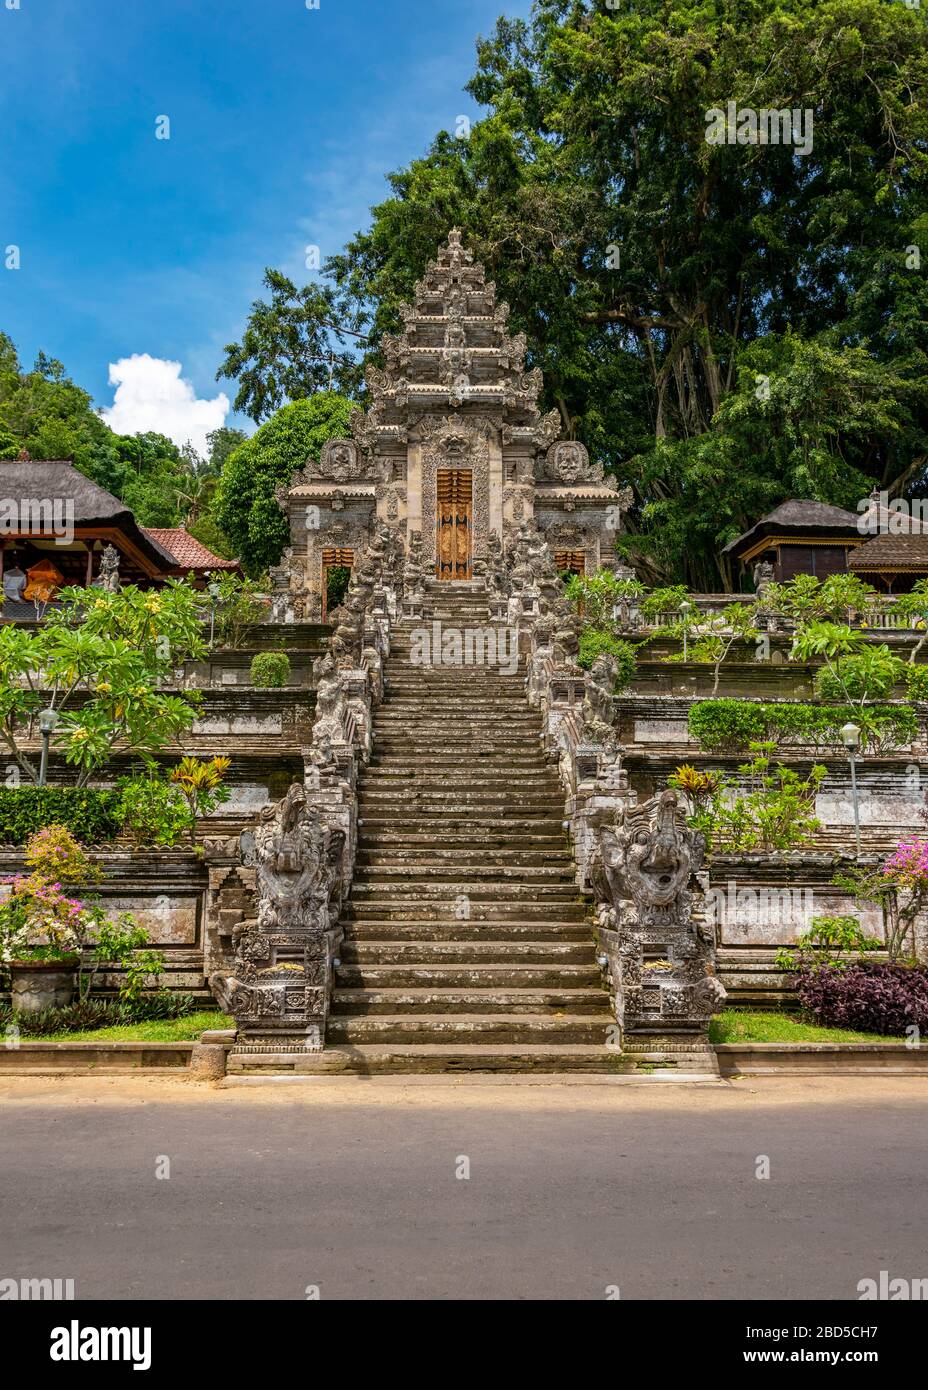 Vertical view of the entrance to Kehen temple in Bali, Indonesia. Stock Photo